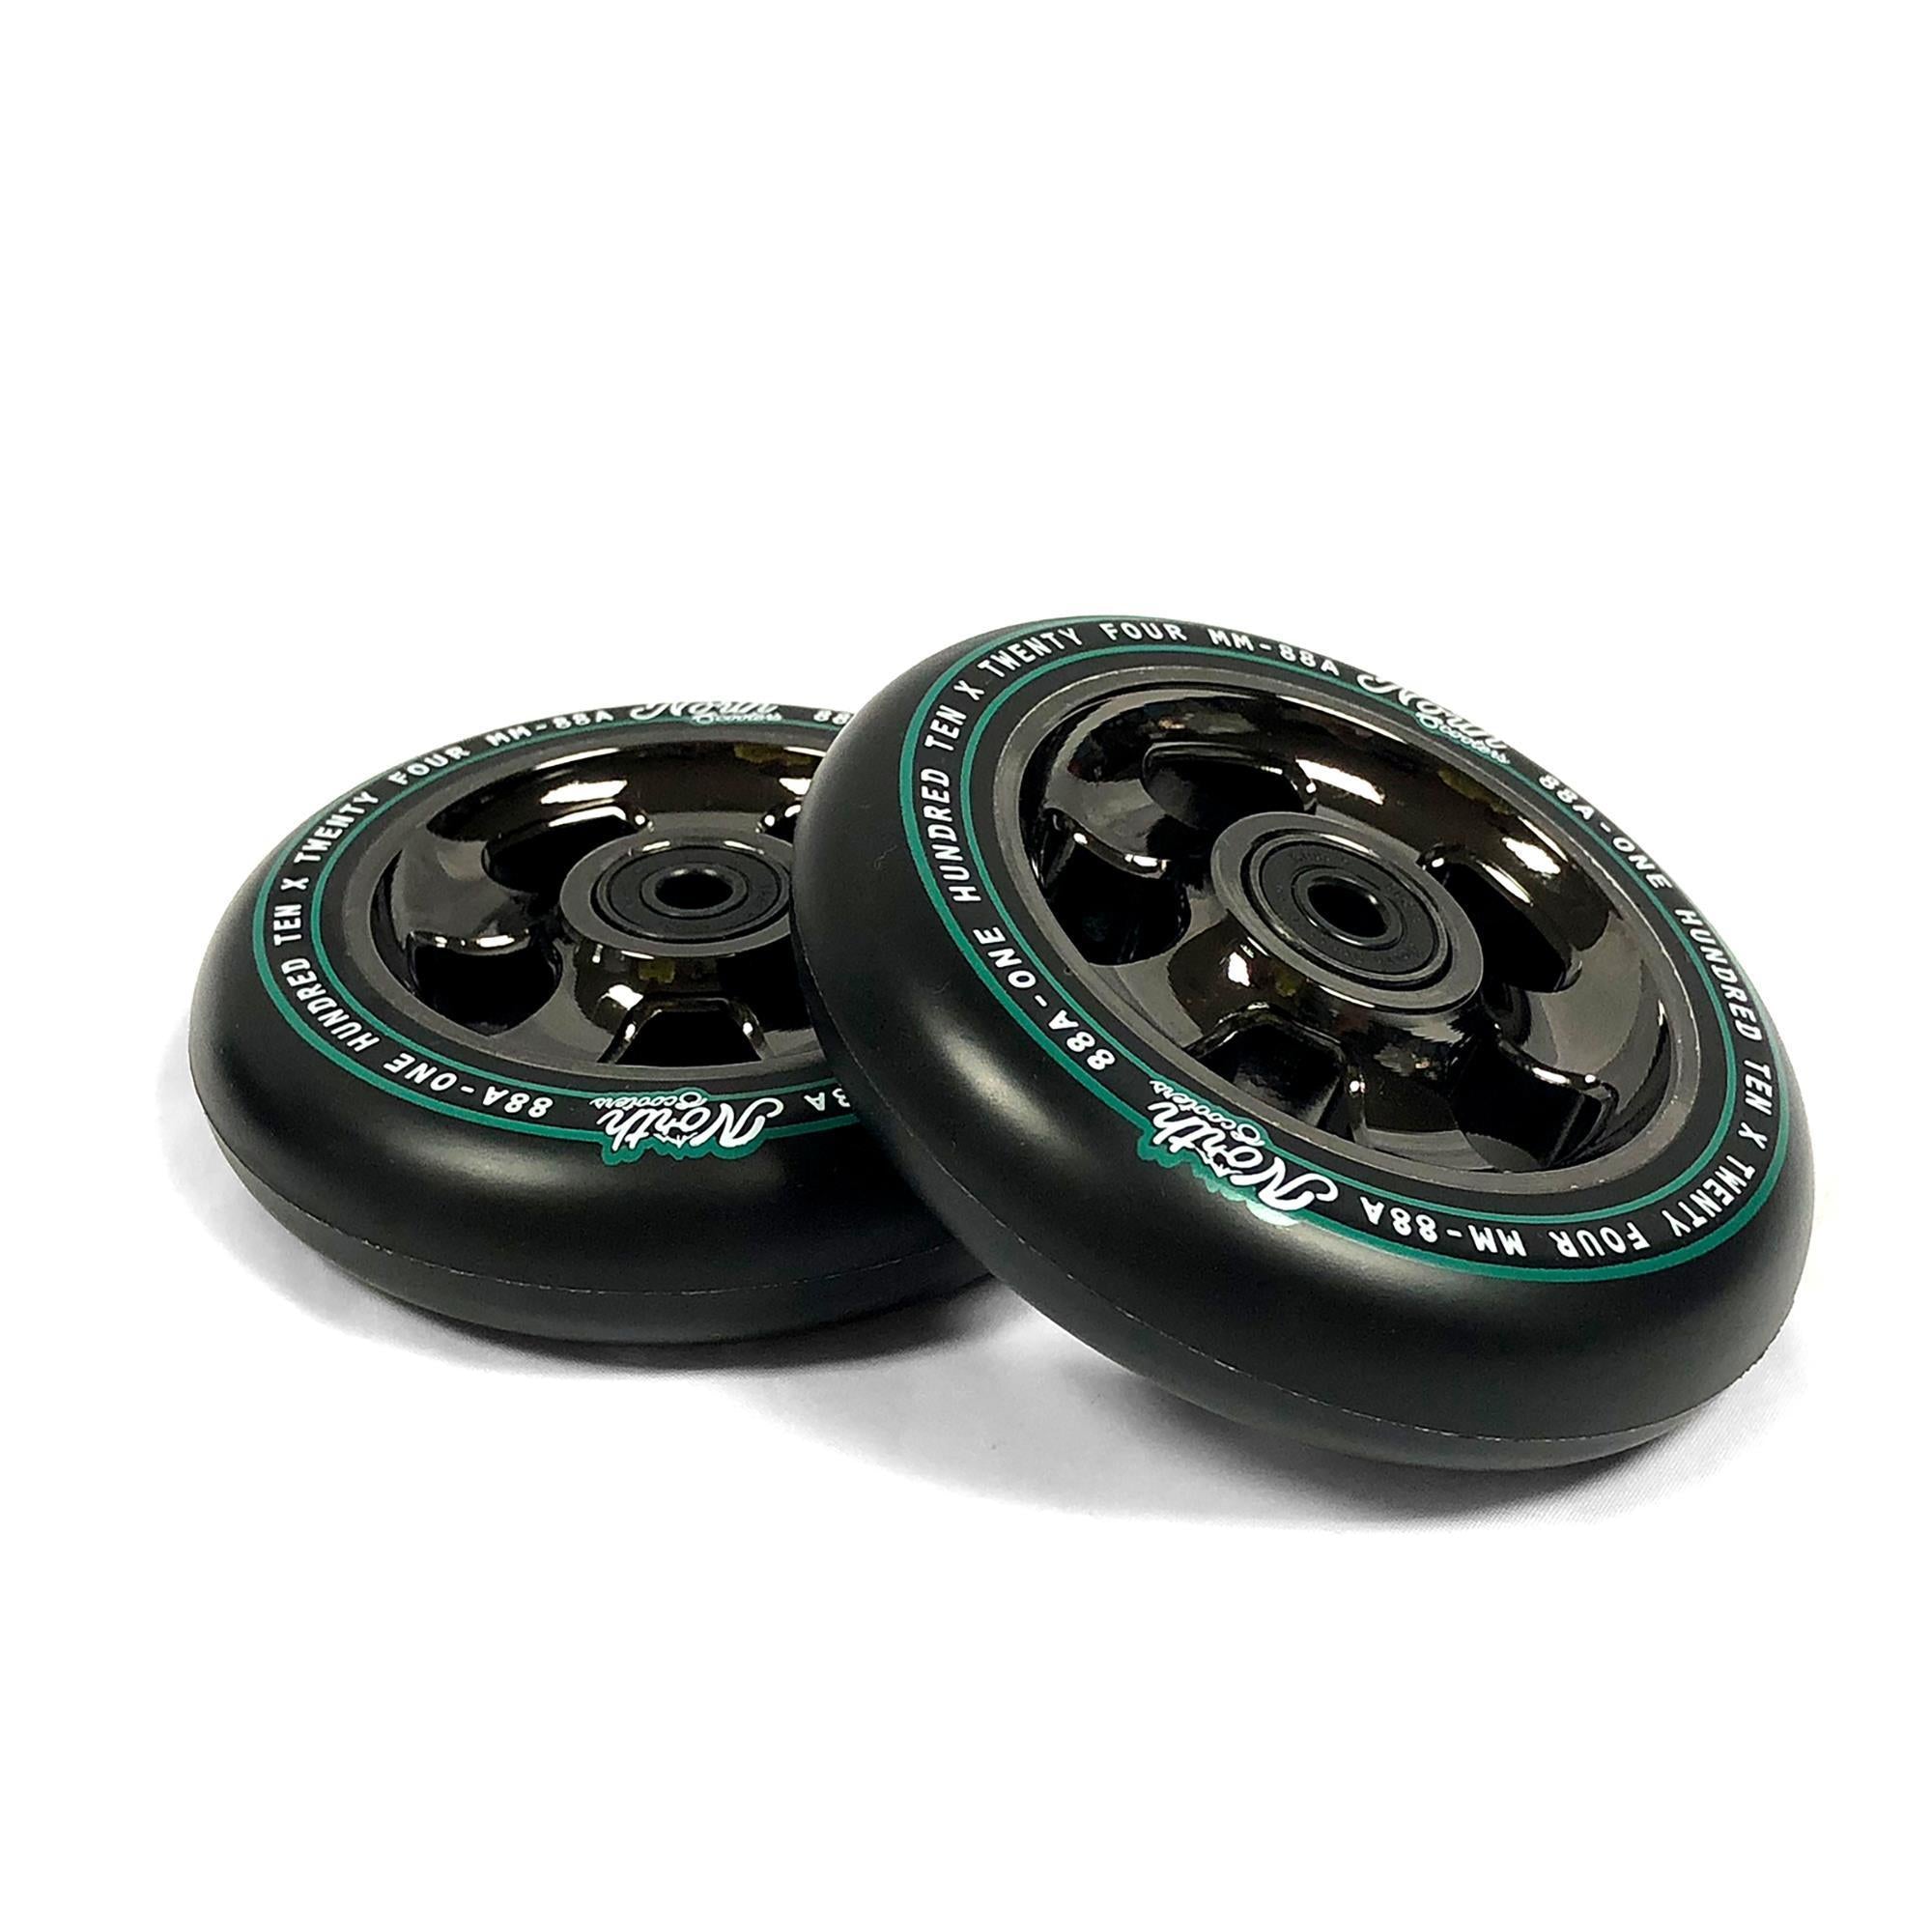 North Scooters HQ 110mm (PAIR) - Scooter Wheels Black Chrome